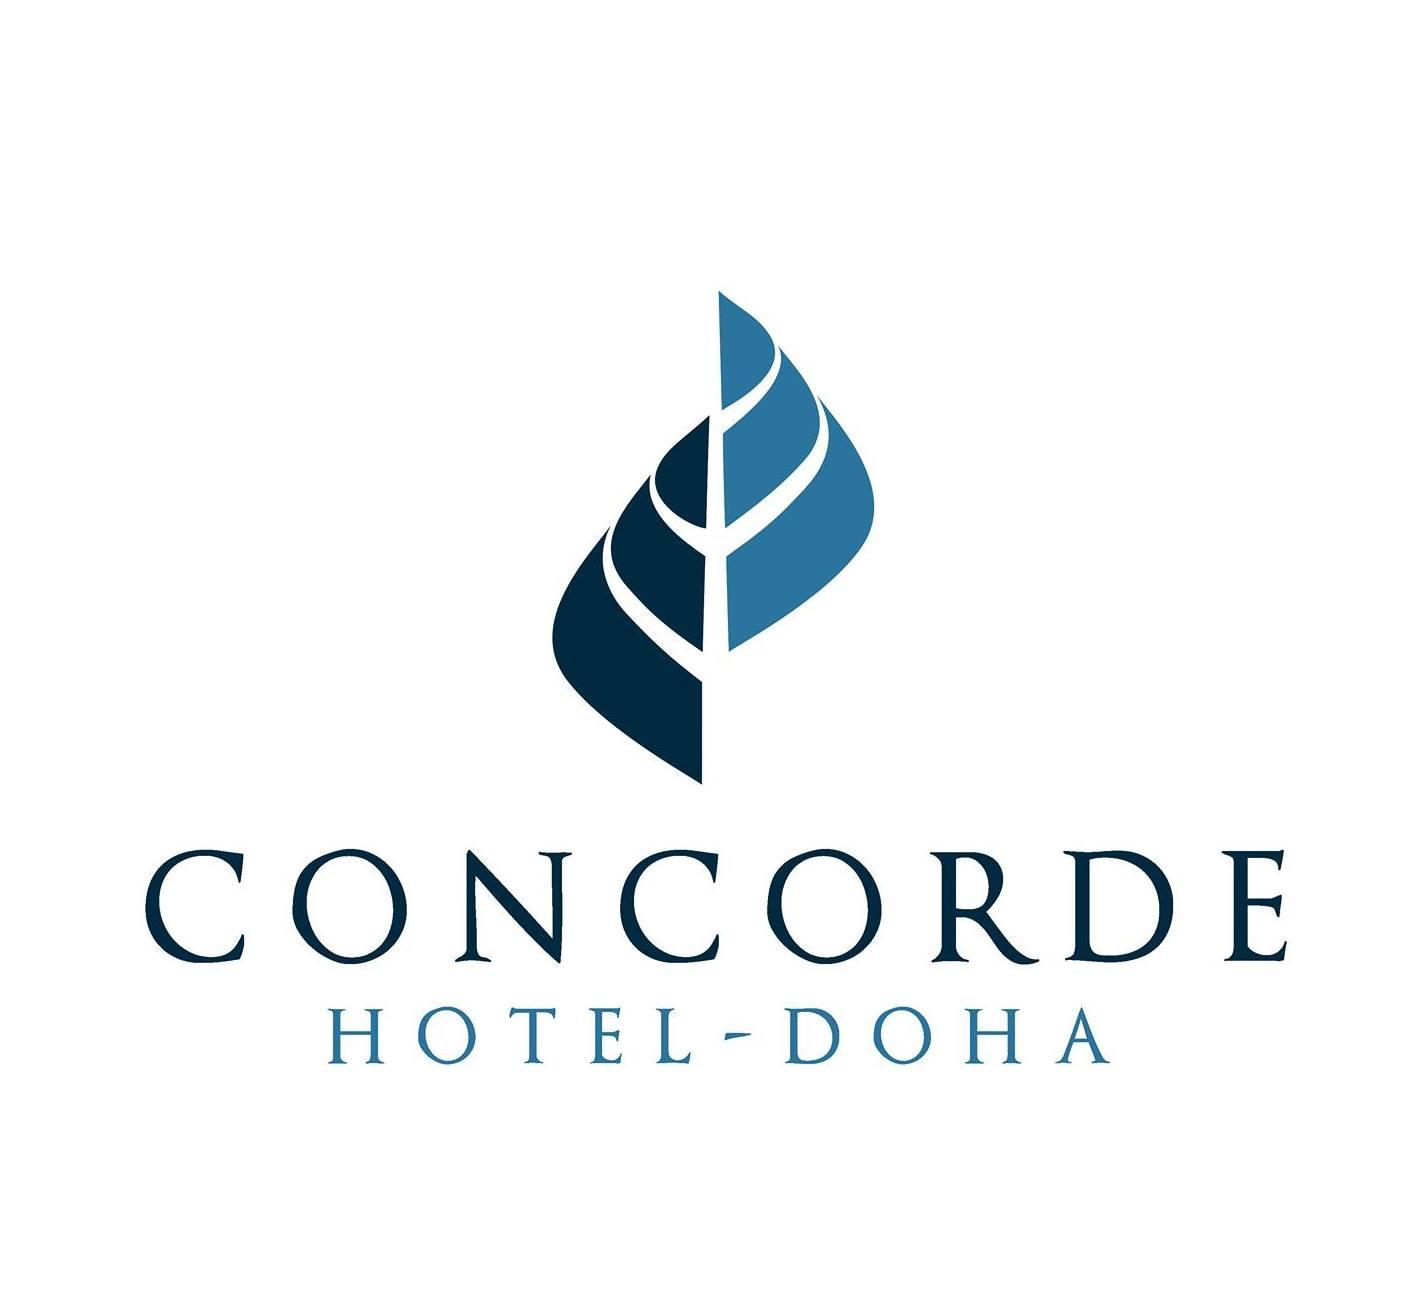 Friday Family Brunch at Concorde Hotel Doha